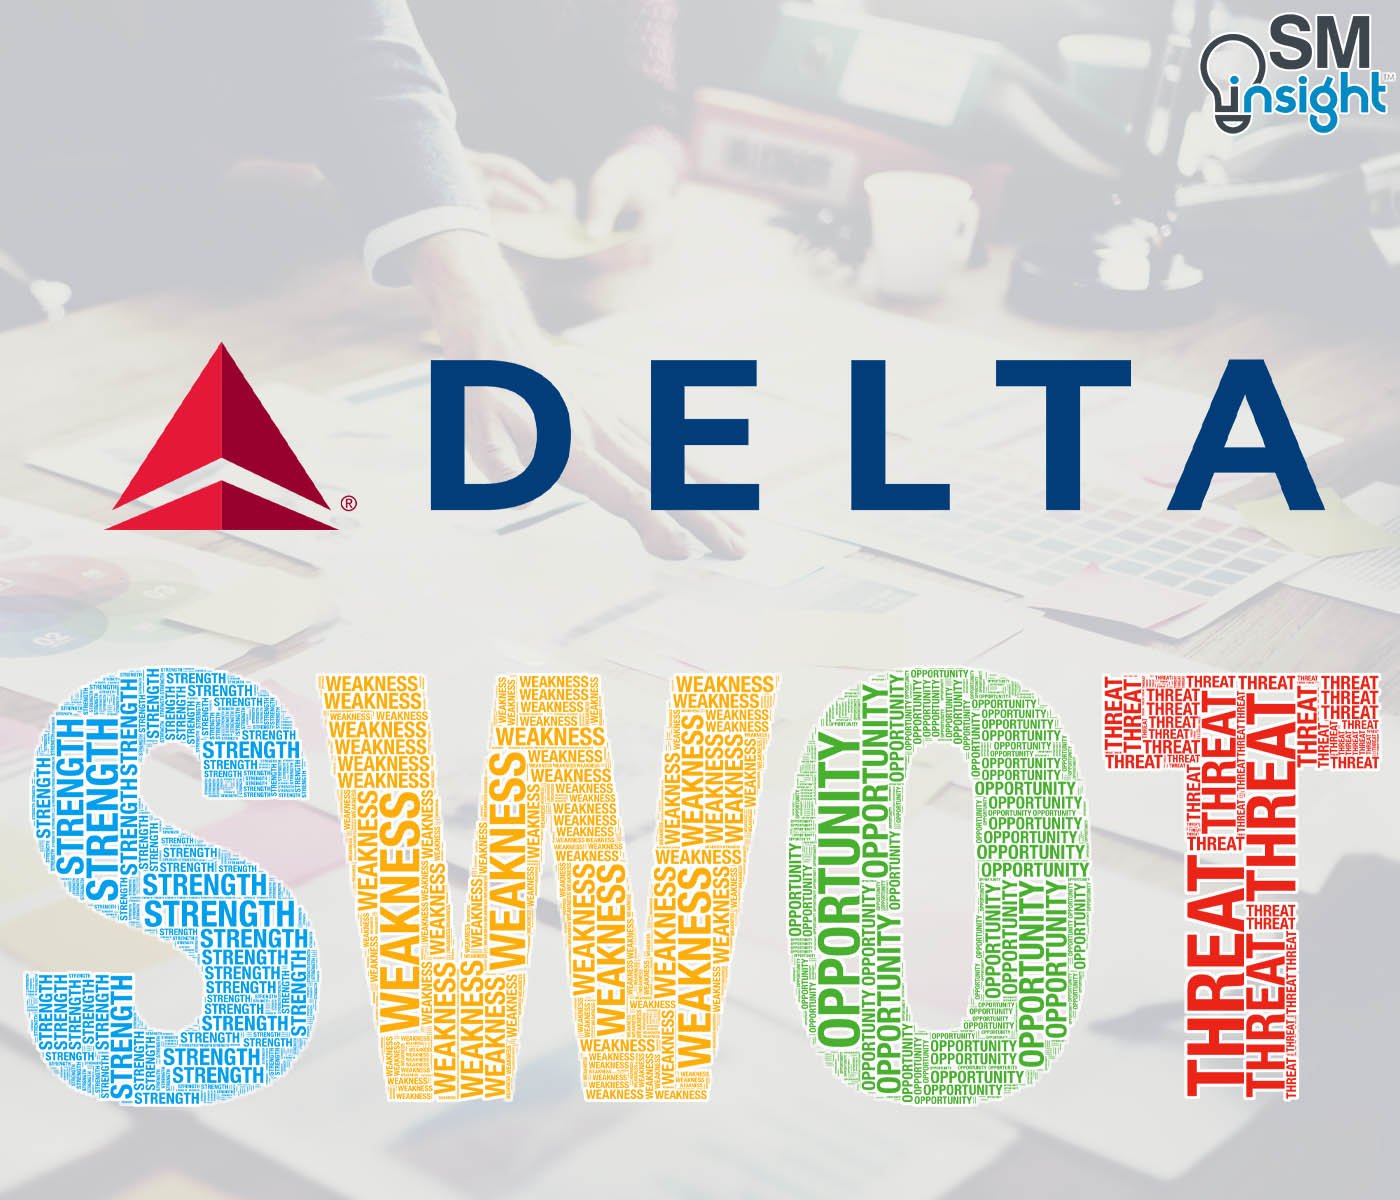 Delta air lines SWOT analysis